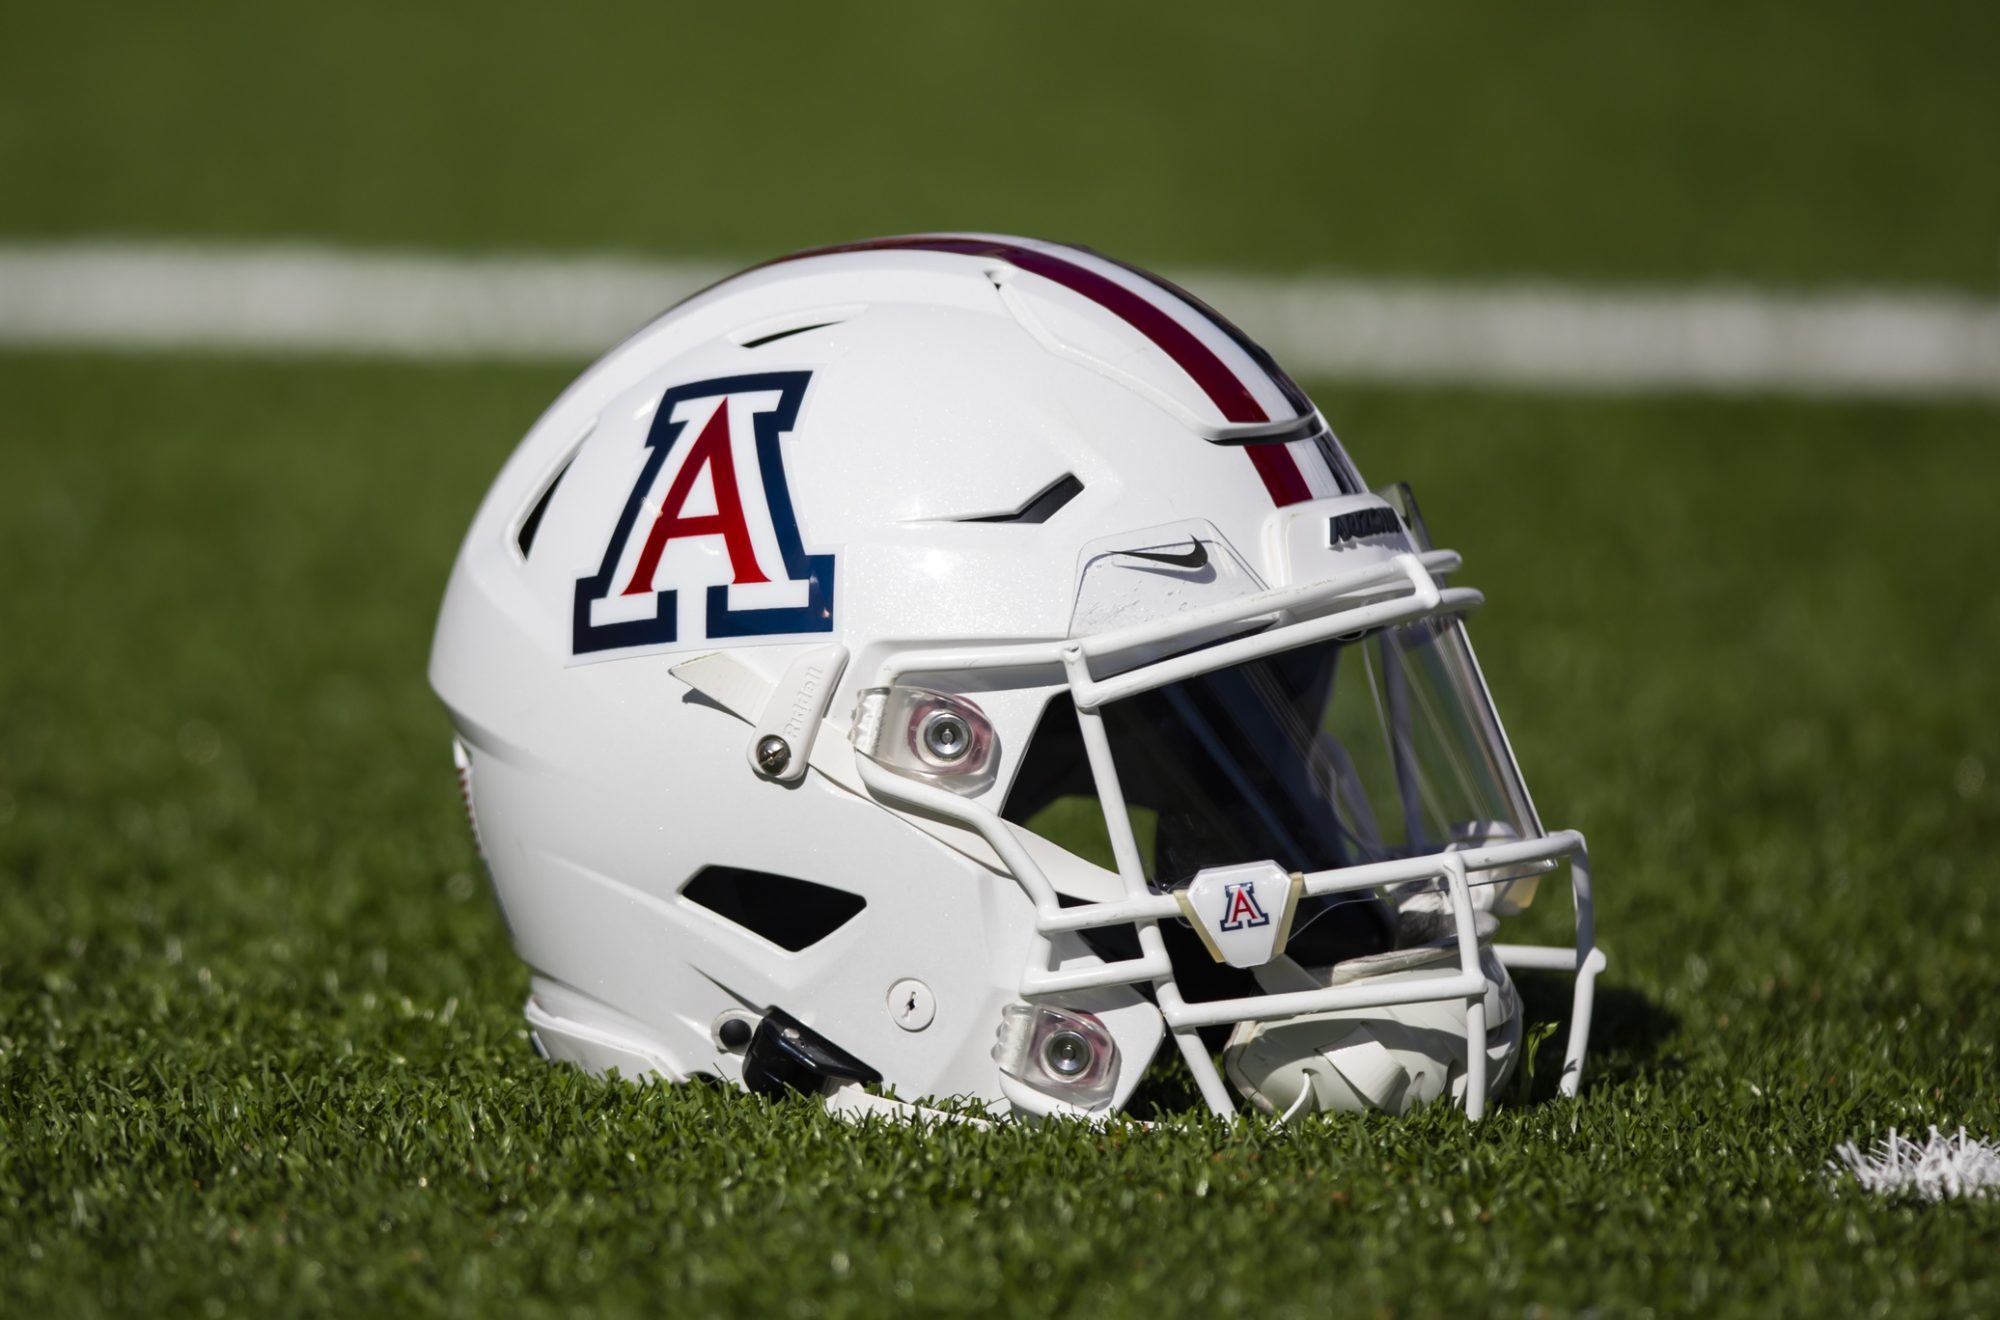 Financial Woes Could Force Arizona To Cut Sports Programs